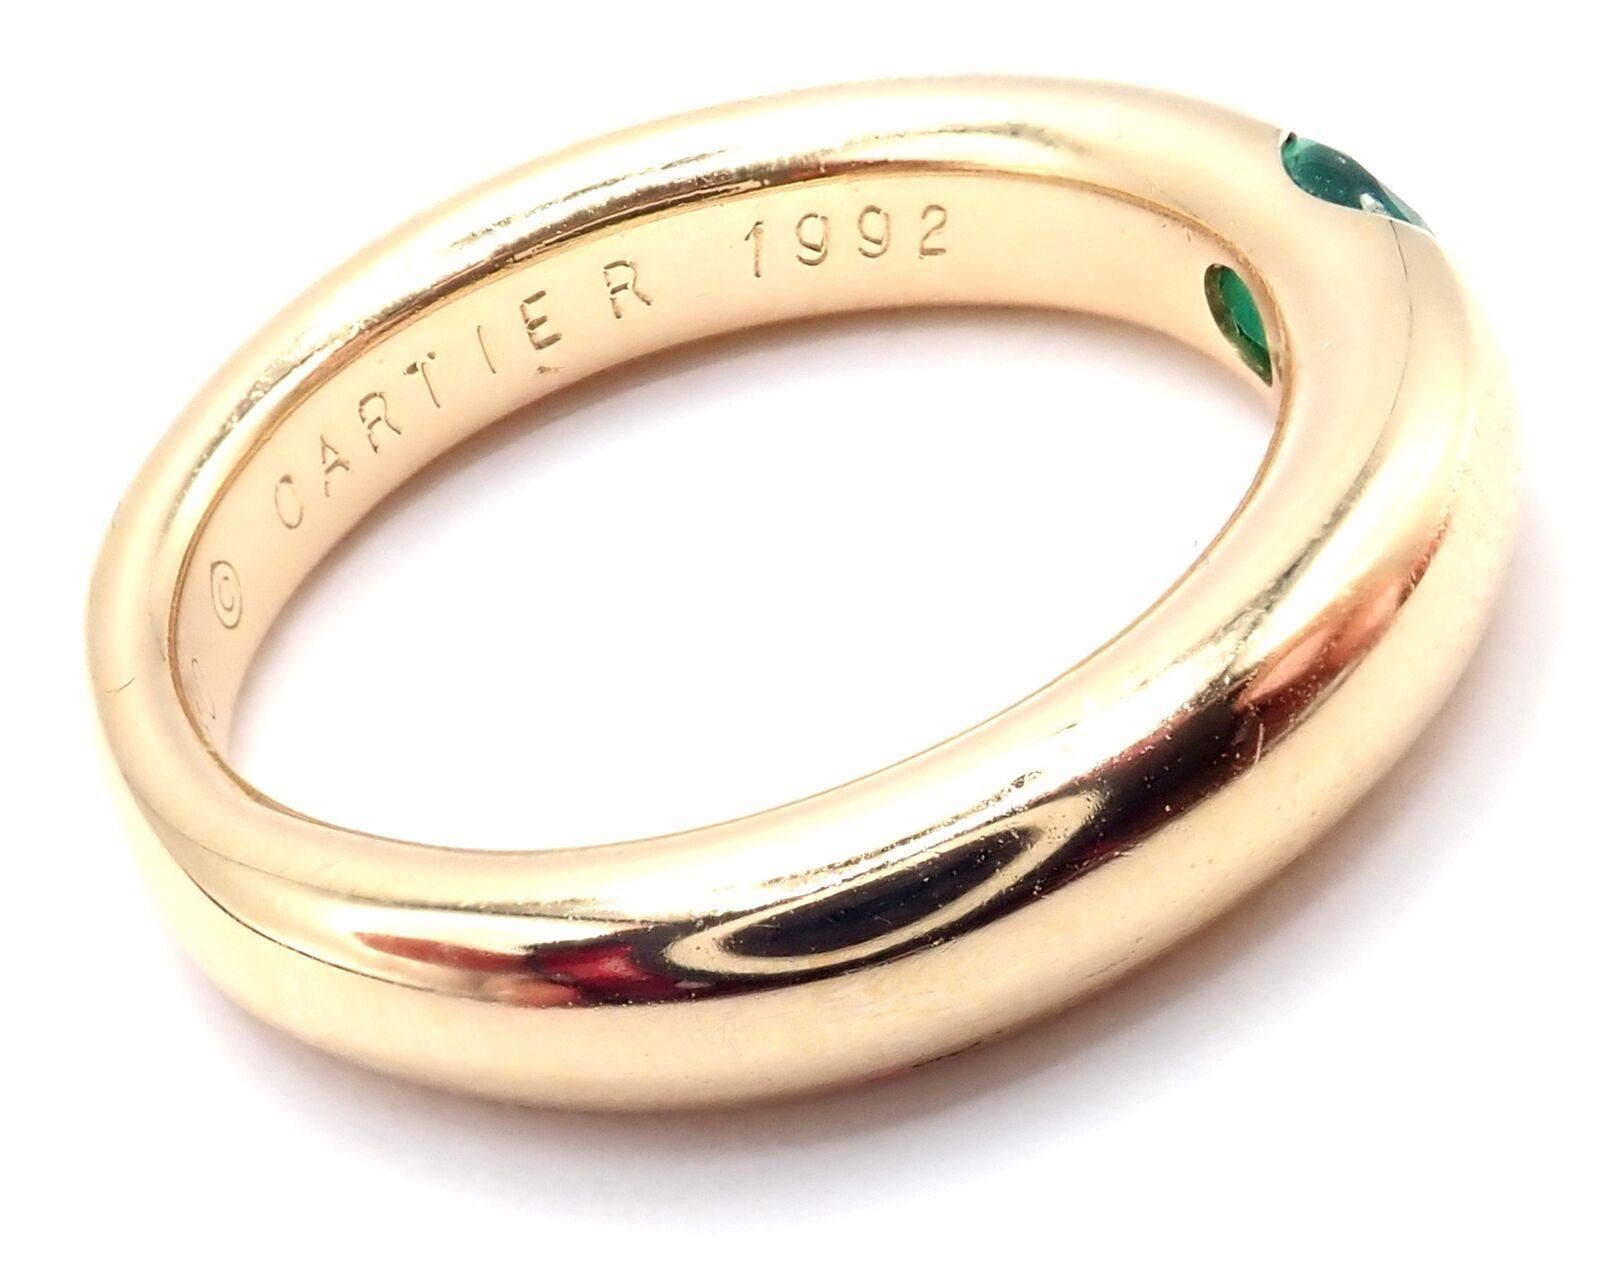 18k Yellow Gold Ellipse Emerald Band Ring by Cartier.
With 1 oval-shaped beautiful emerald 5mm x 4mm.
Details:
Width: 4mm
Weight: 9.5 grams
Ring Size: European 55, US 7 1/4
Stamped Hallmarks: Cartier 750 55 C 1992 921XX(serial number omitted)
*Free